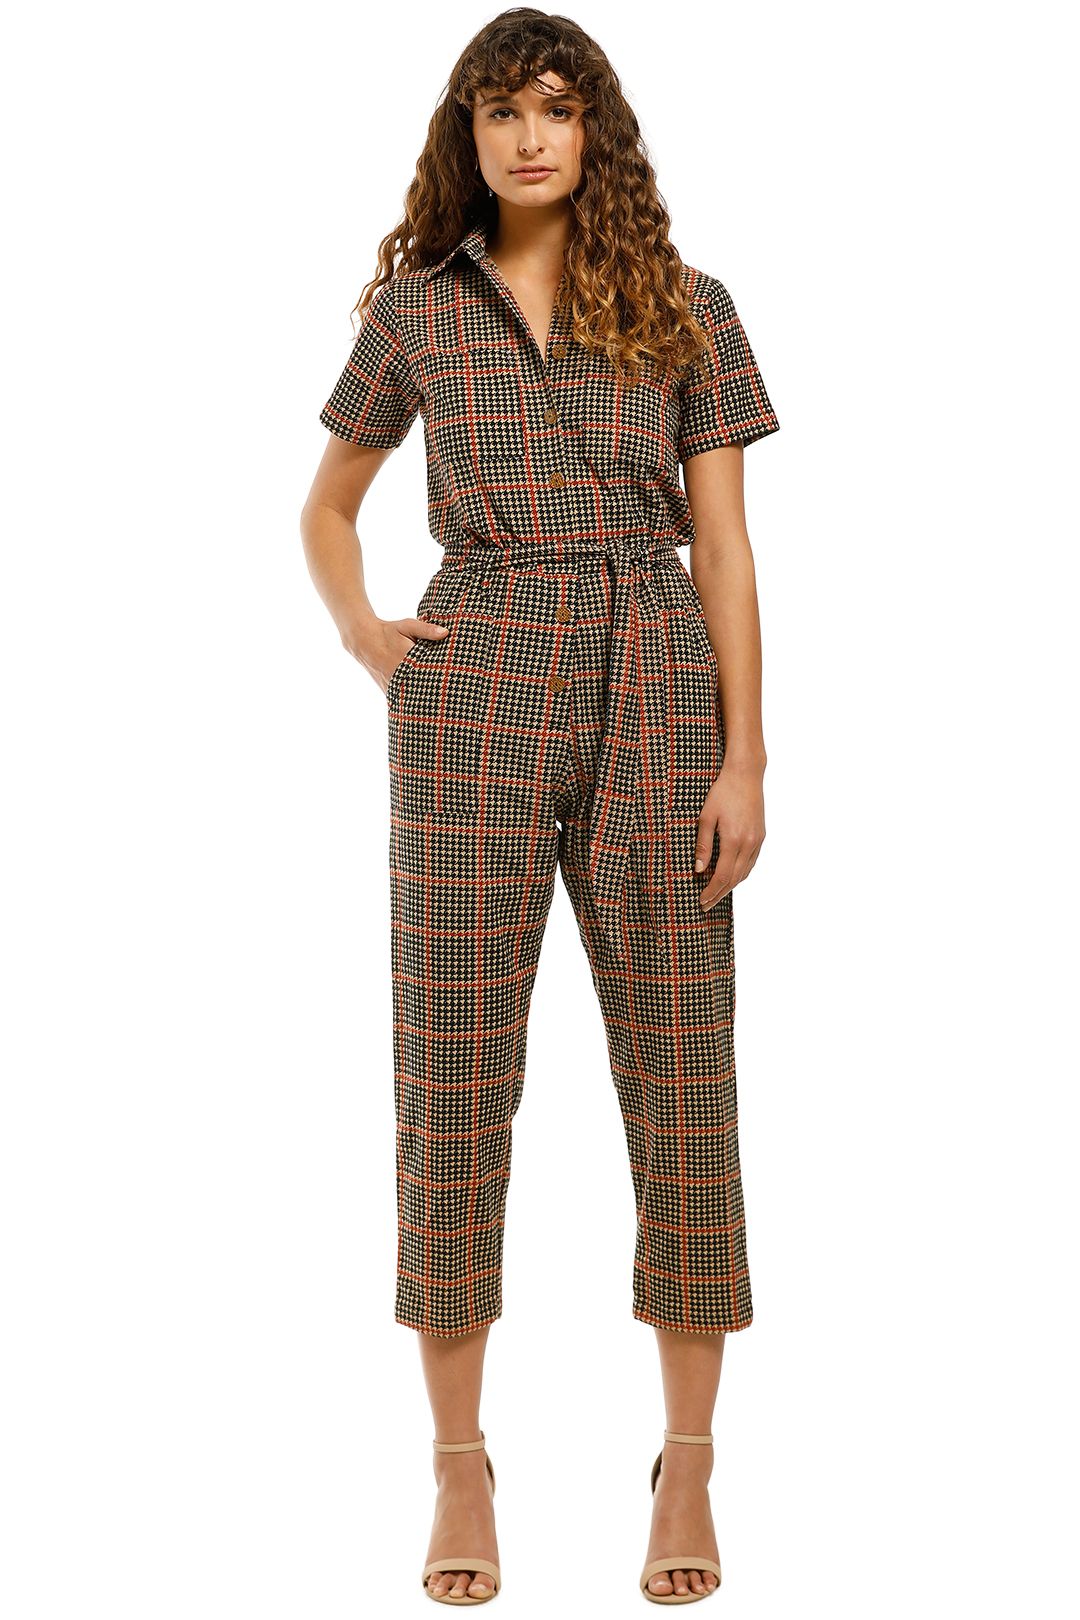 Rue-Stiic-Alamere-Worksuit-Houndstooth-Front